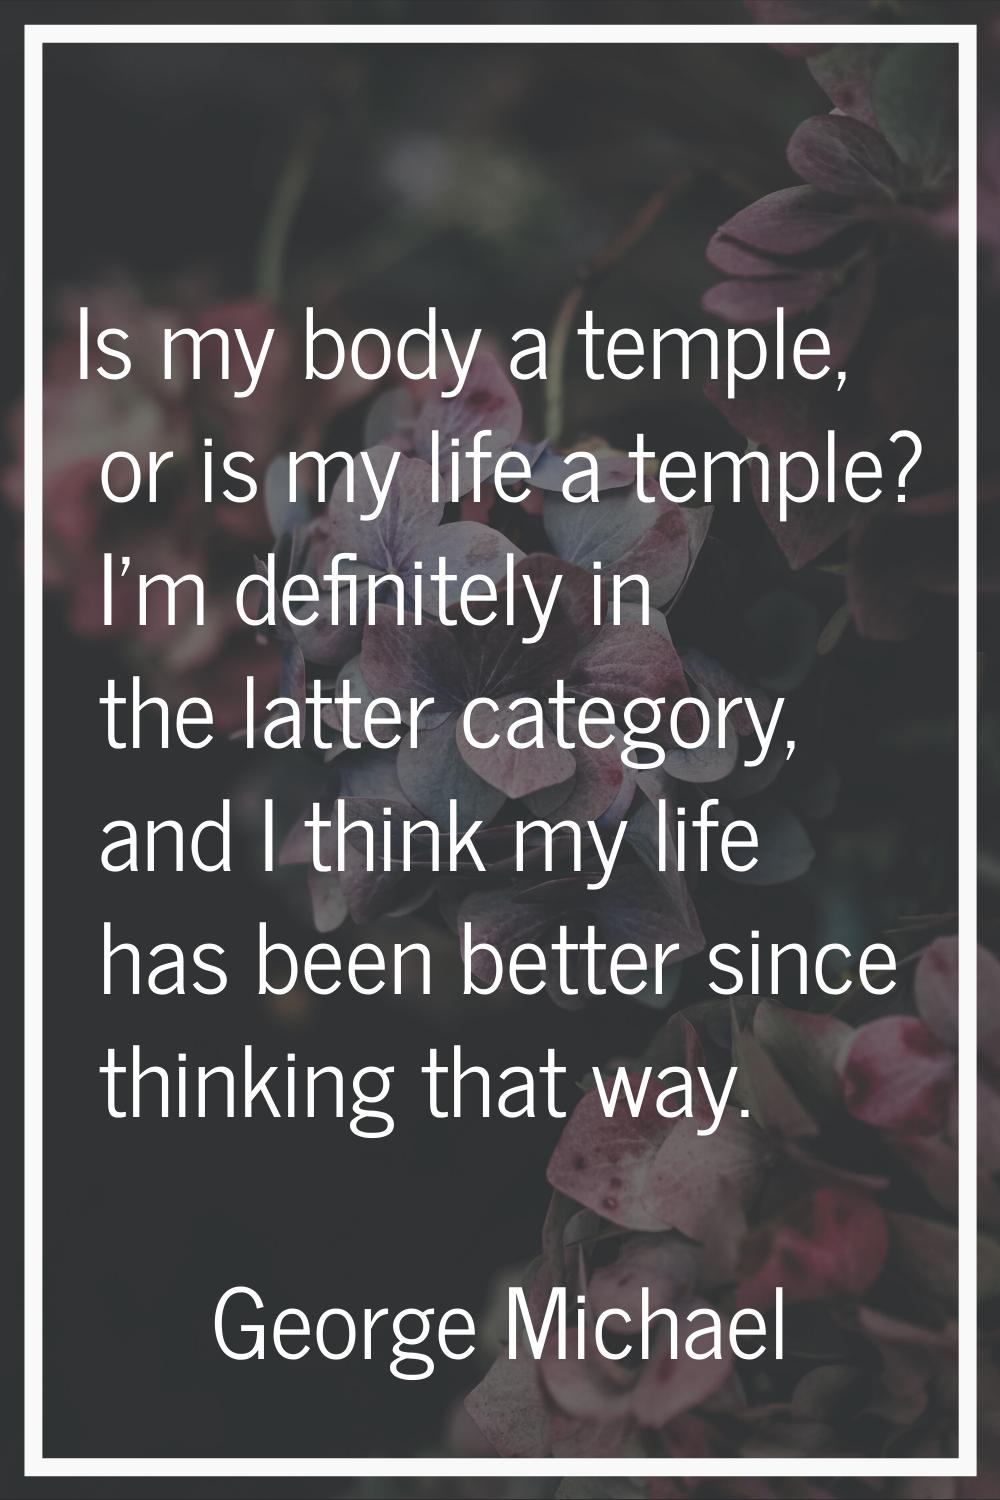 Is my body a temple, or is my life a temple? I'm definitely in the latter category, and I think my 